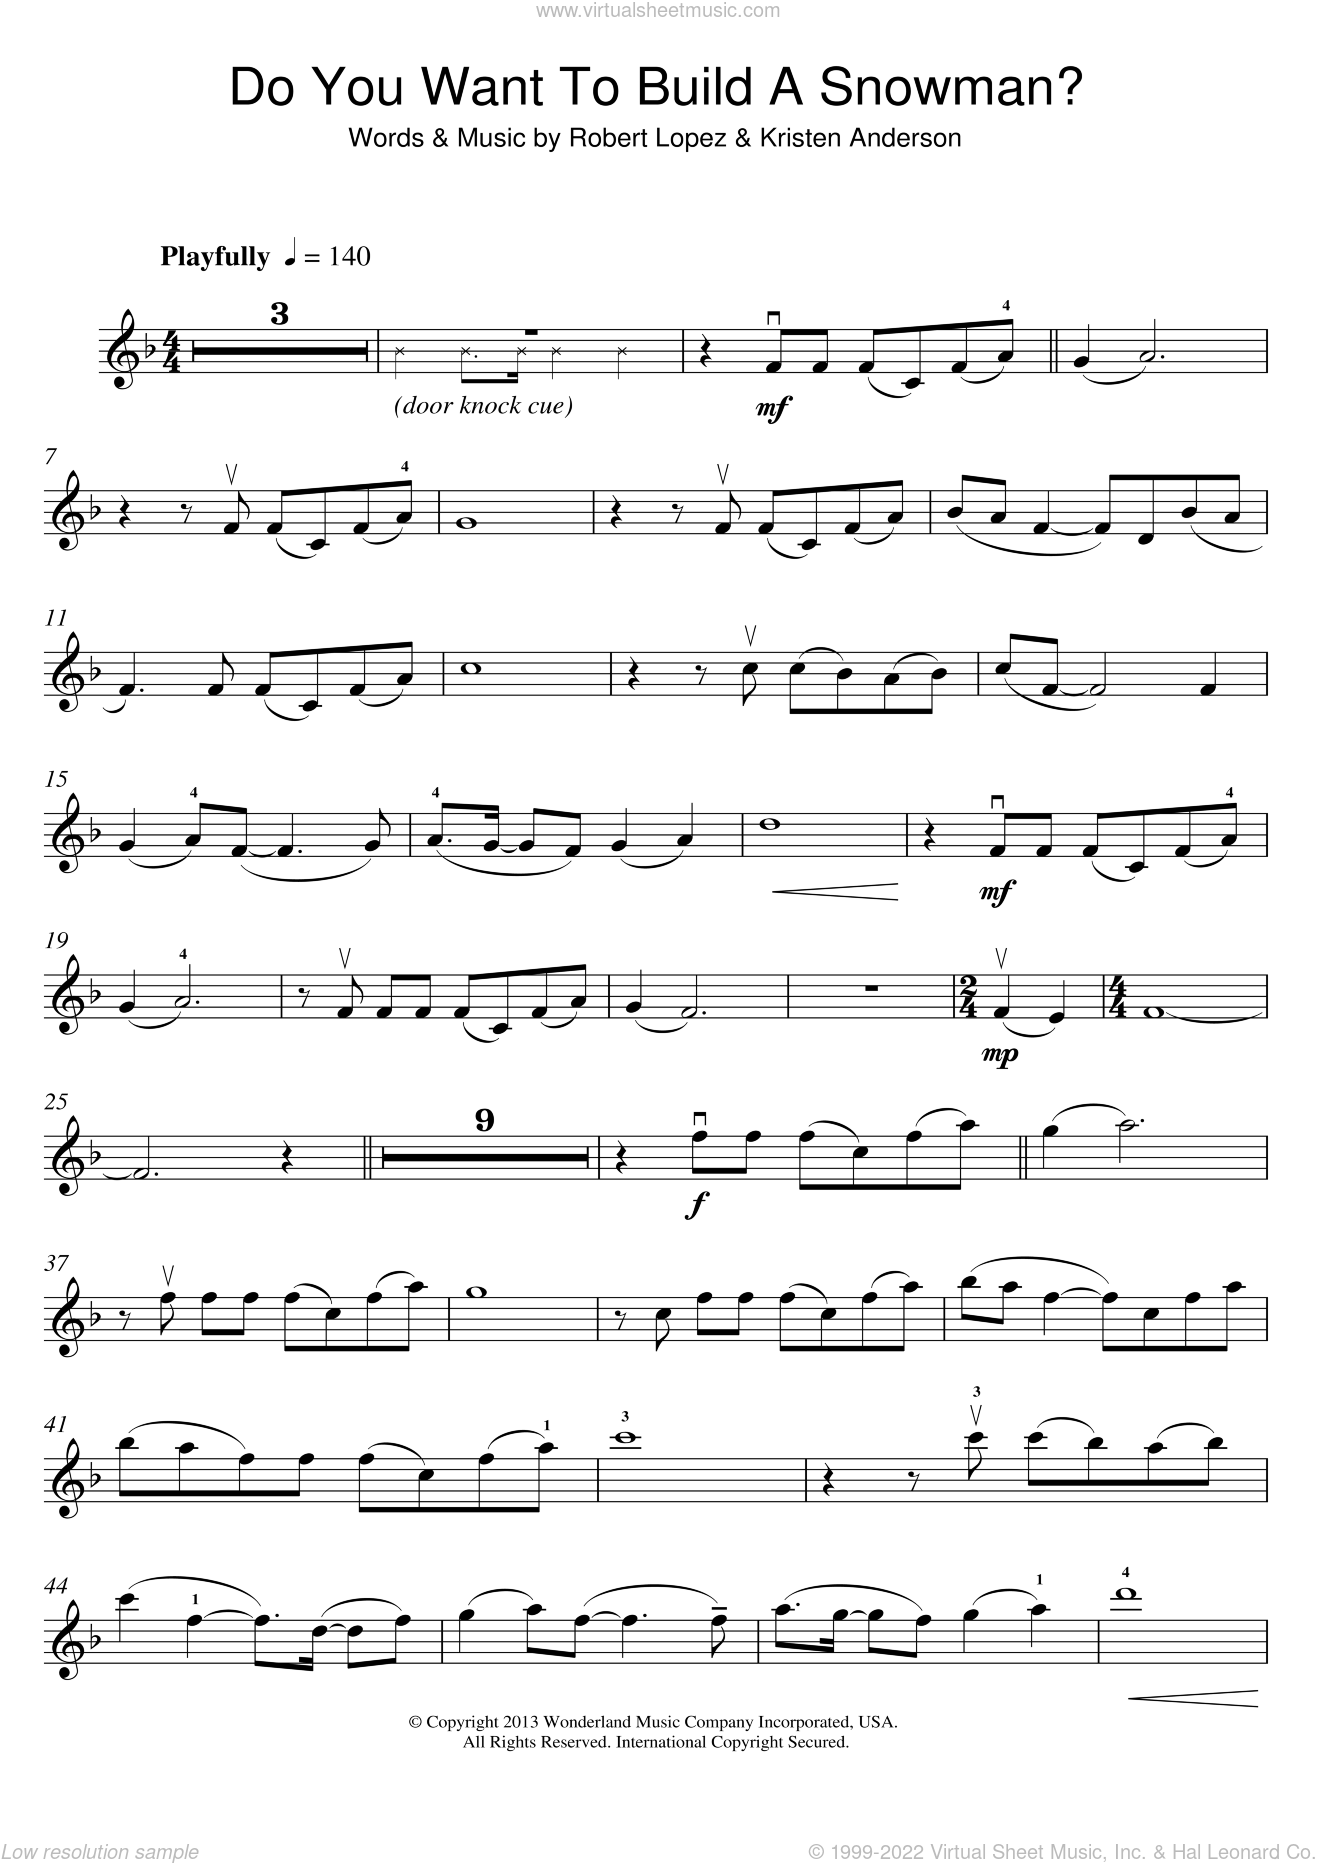 Elementary 2 (Violin) , 27. Do you want to build a snowman Sheet music for  Violin (Solo)